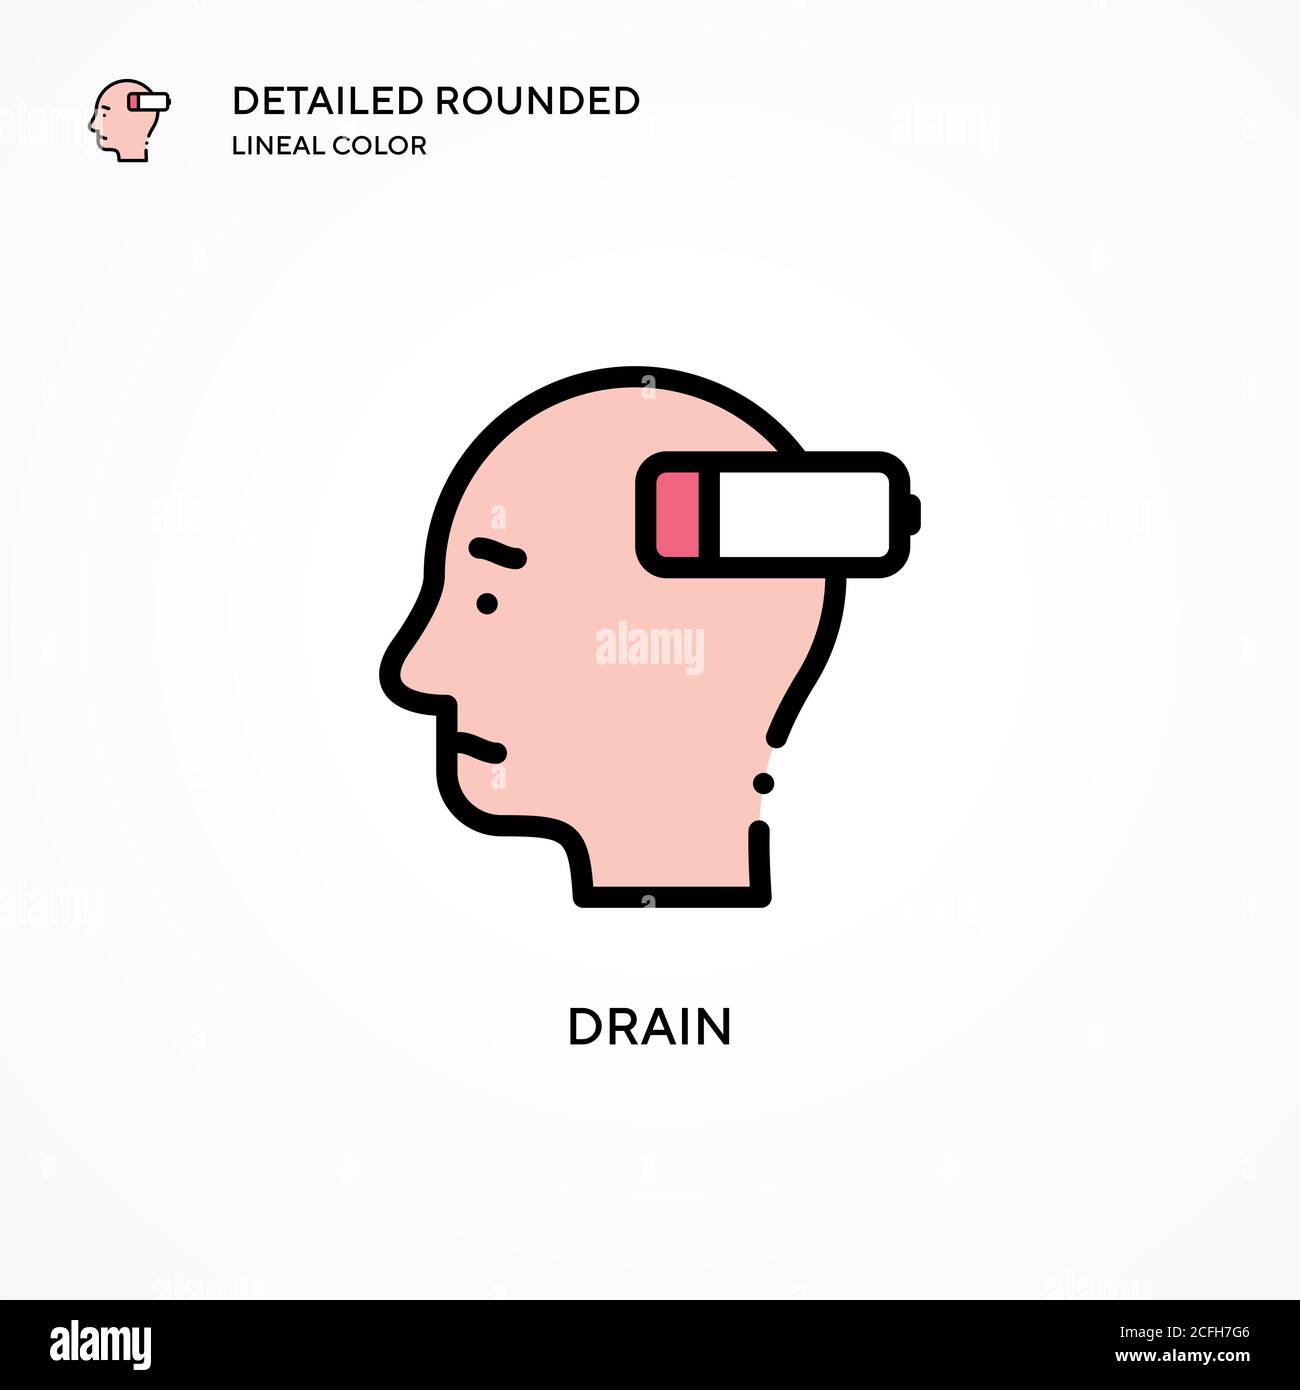 Drain vector icon. Modern vector illustration concepts. Easy to edit and customize. Stock Vector